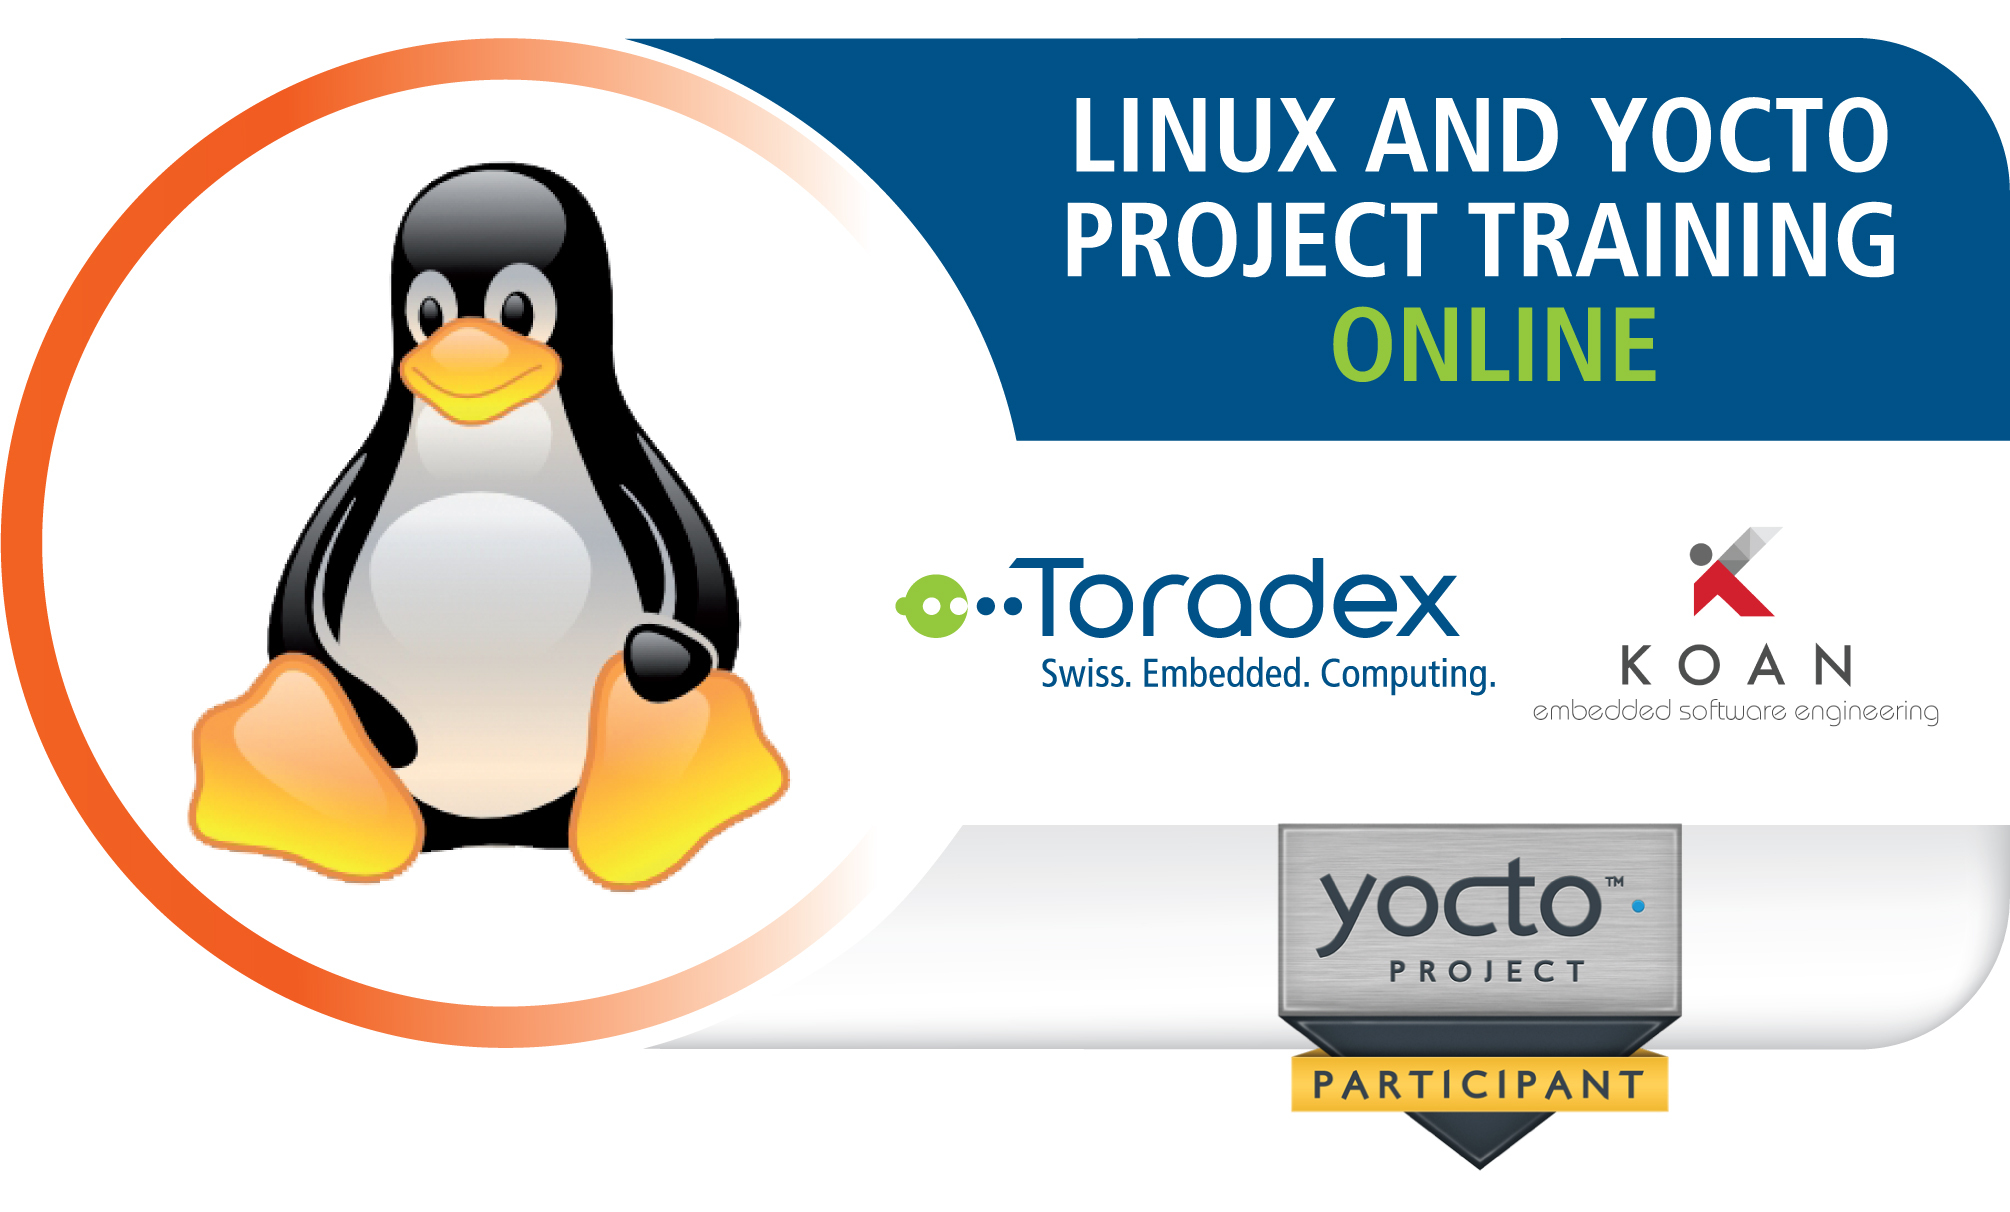 Linux and Yocto Project Training Online